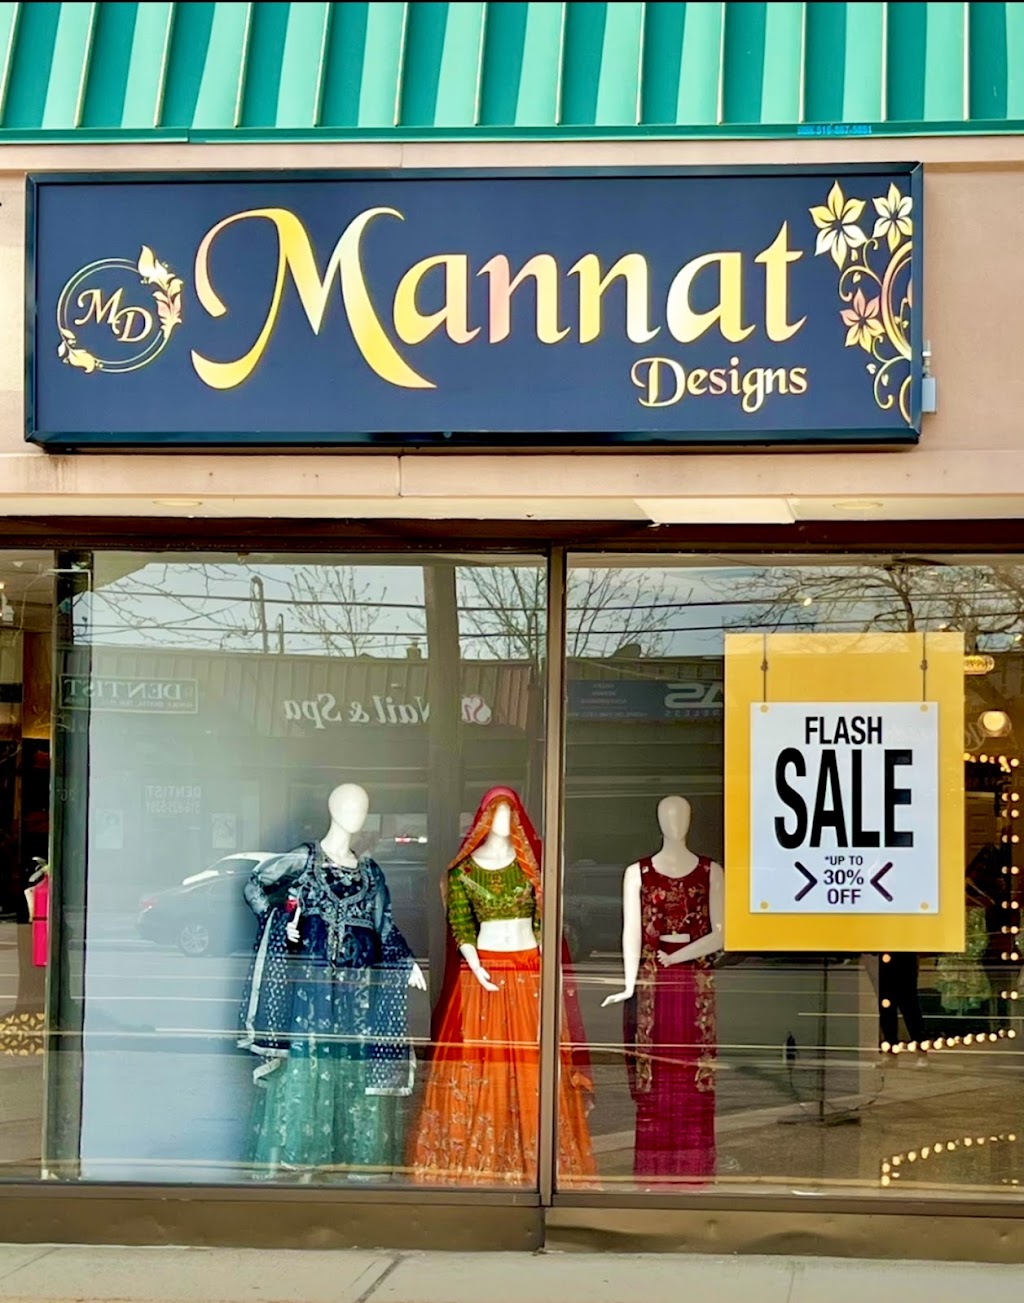 Mannat Designs | 250 W Old Country Rd, Hicksville, NY 11801 | Phone: (516) 366-7324